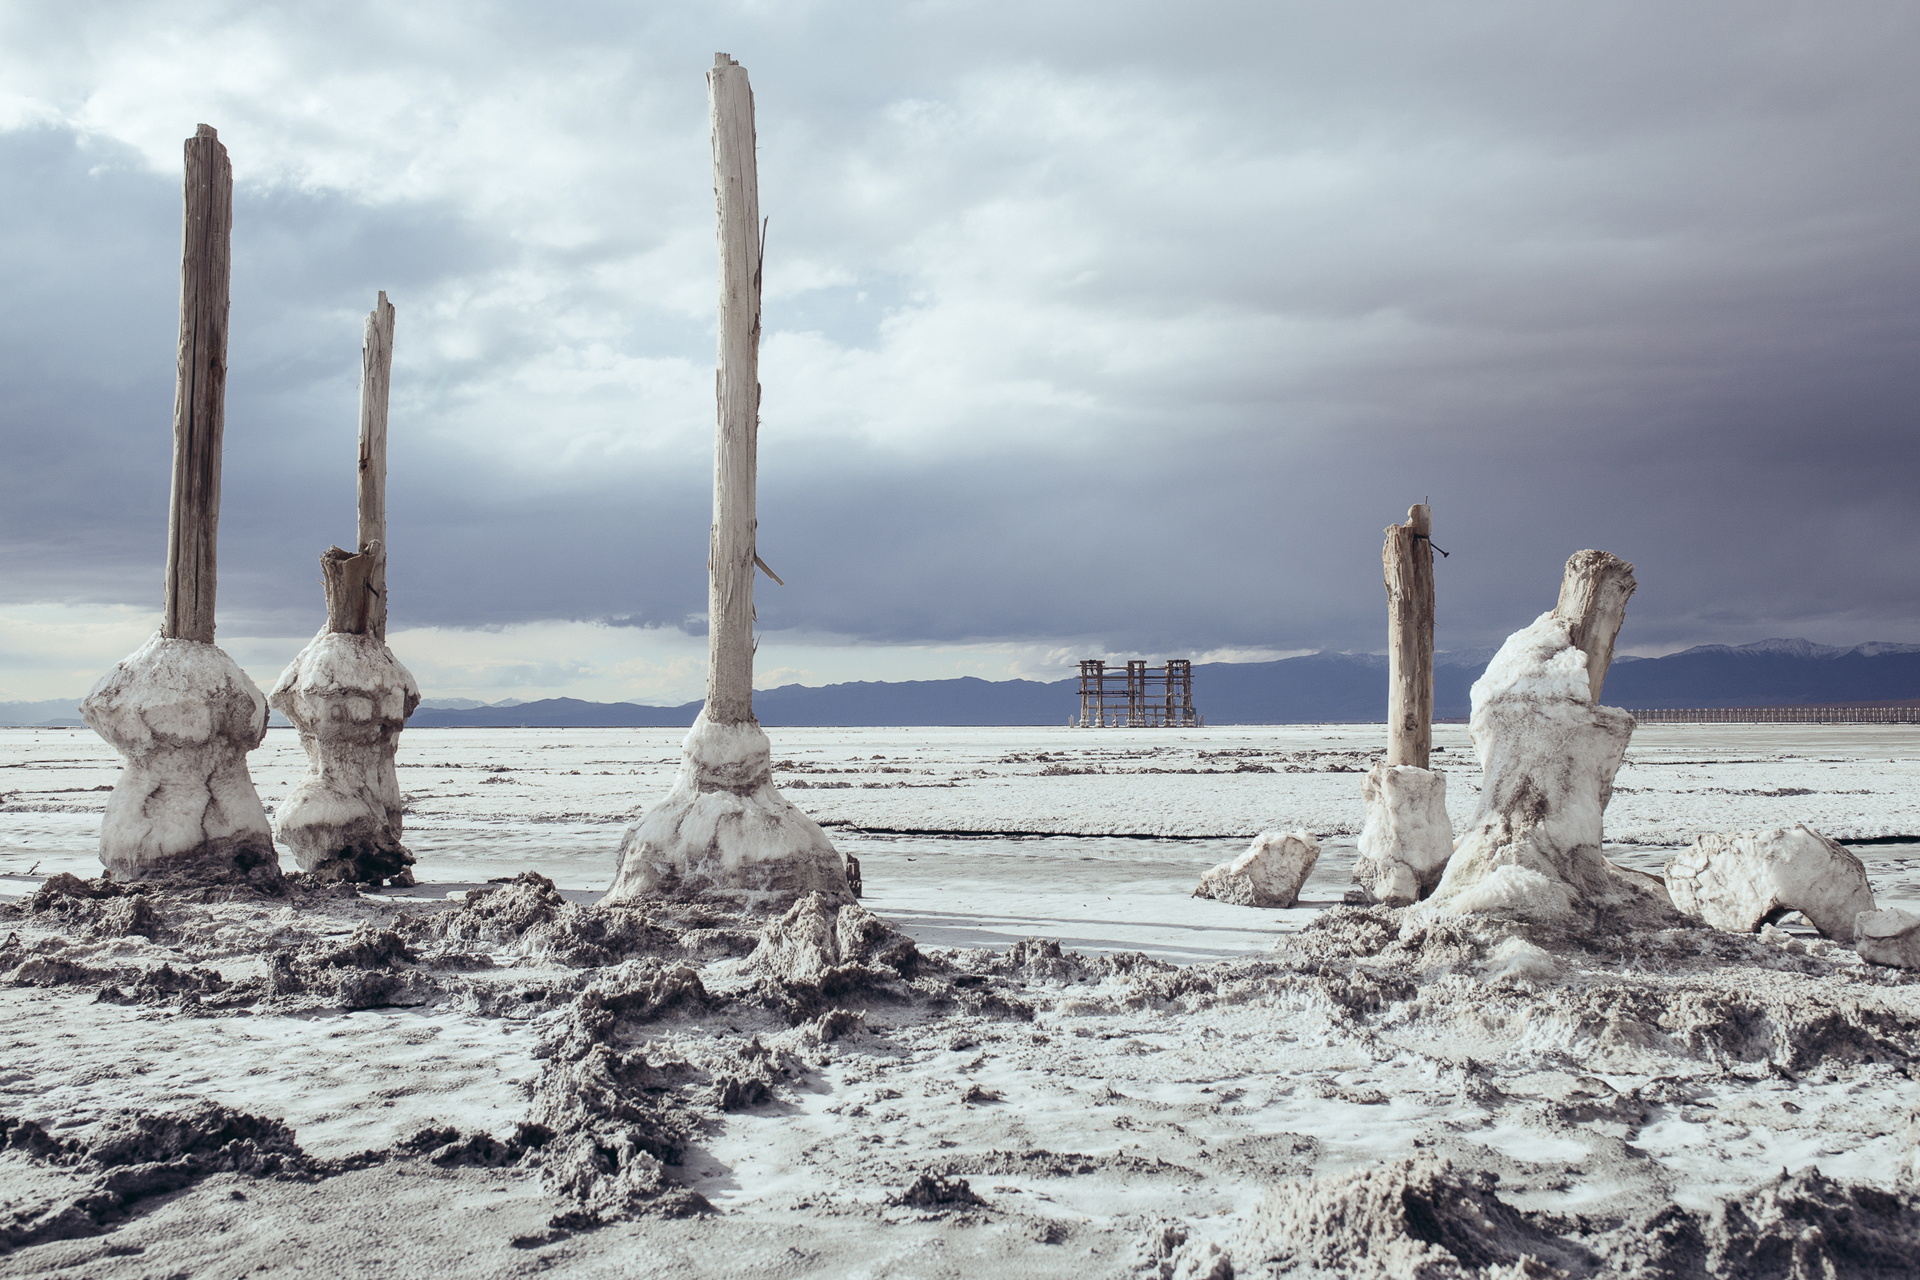 A photographer builds a personal account of how climate change altered Lake Urmia